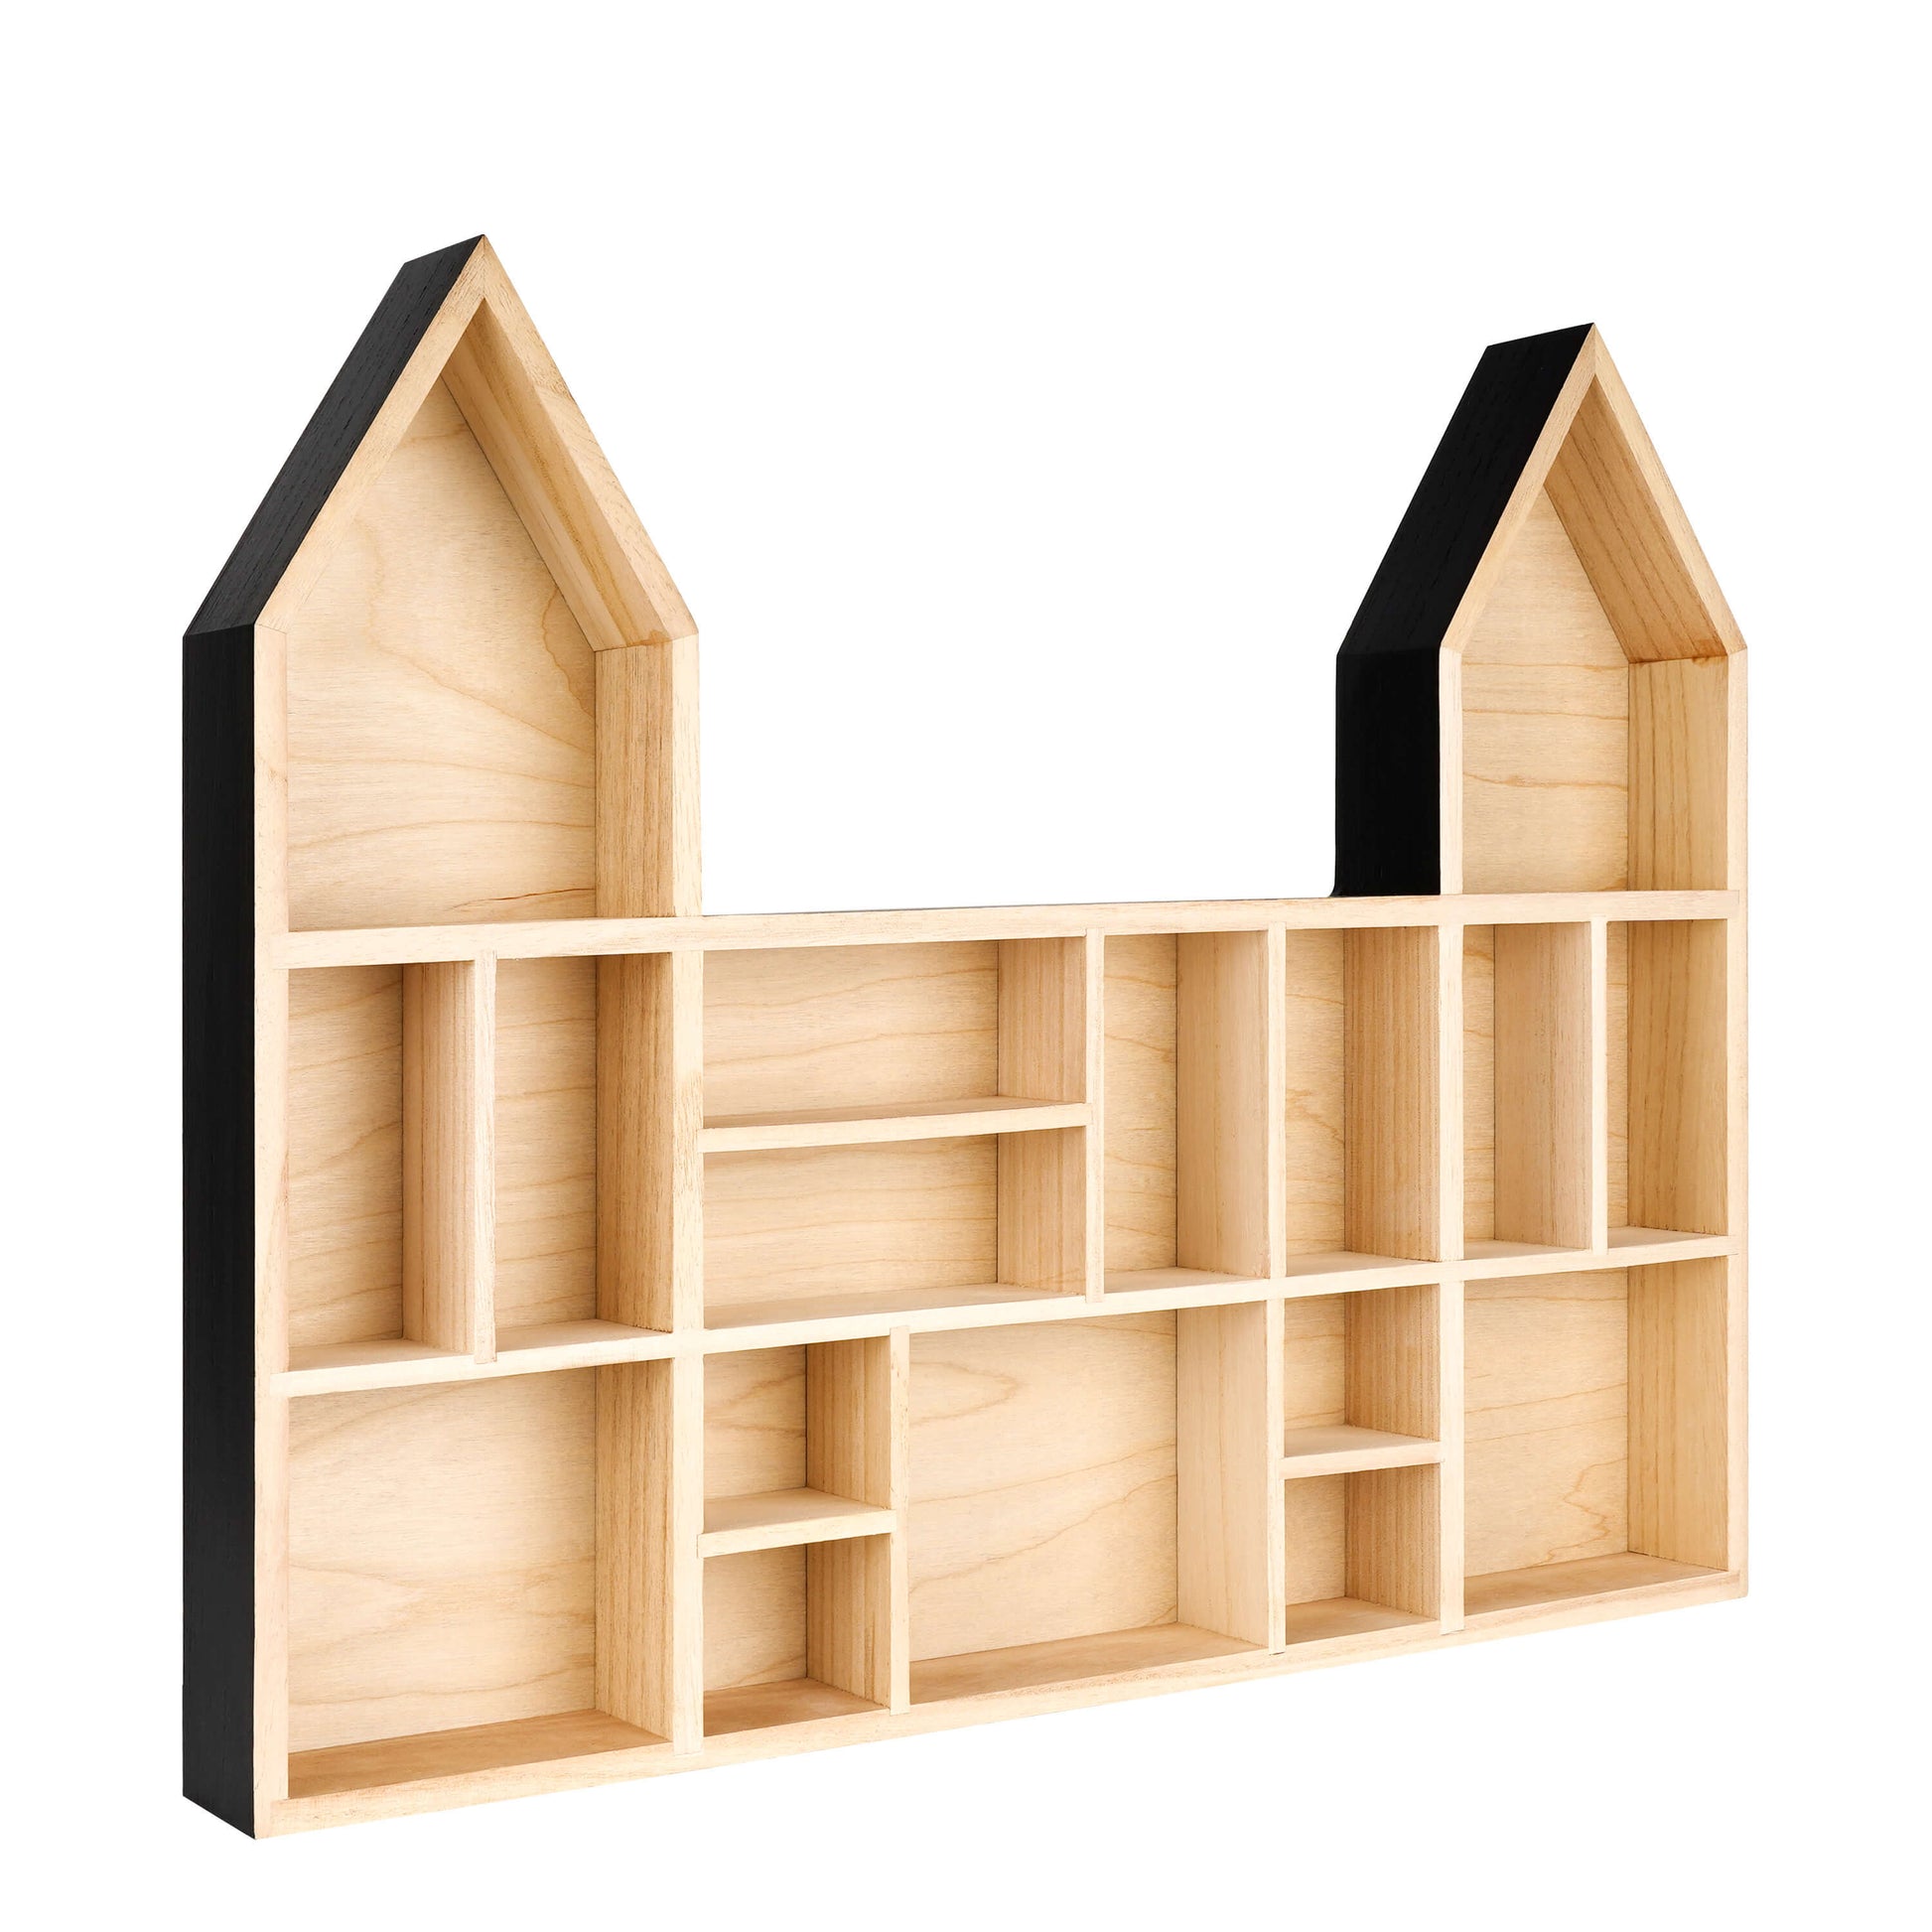 Castle shaped wooden toy display shelf with a black finish on the outside ( Empty, side view)